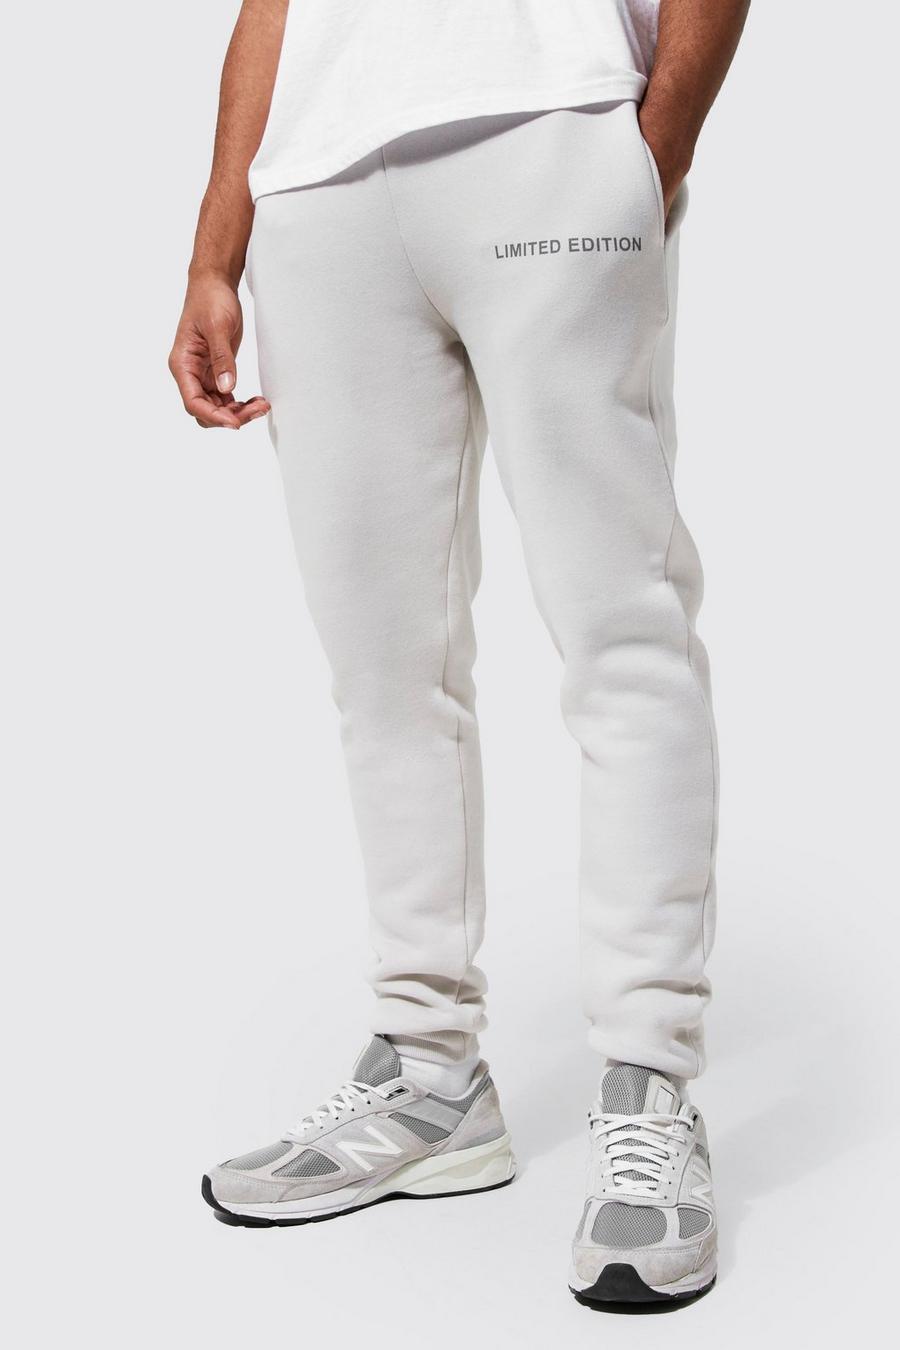 Grey Limited Edition Skinny Fit Jogger